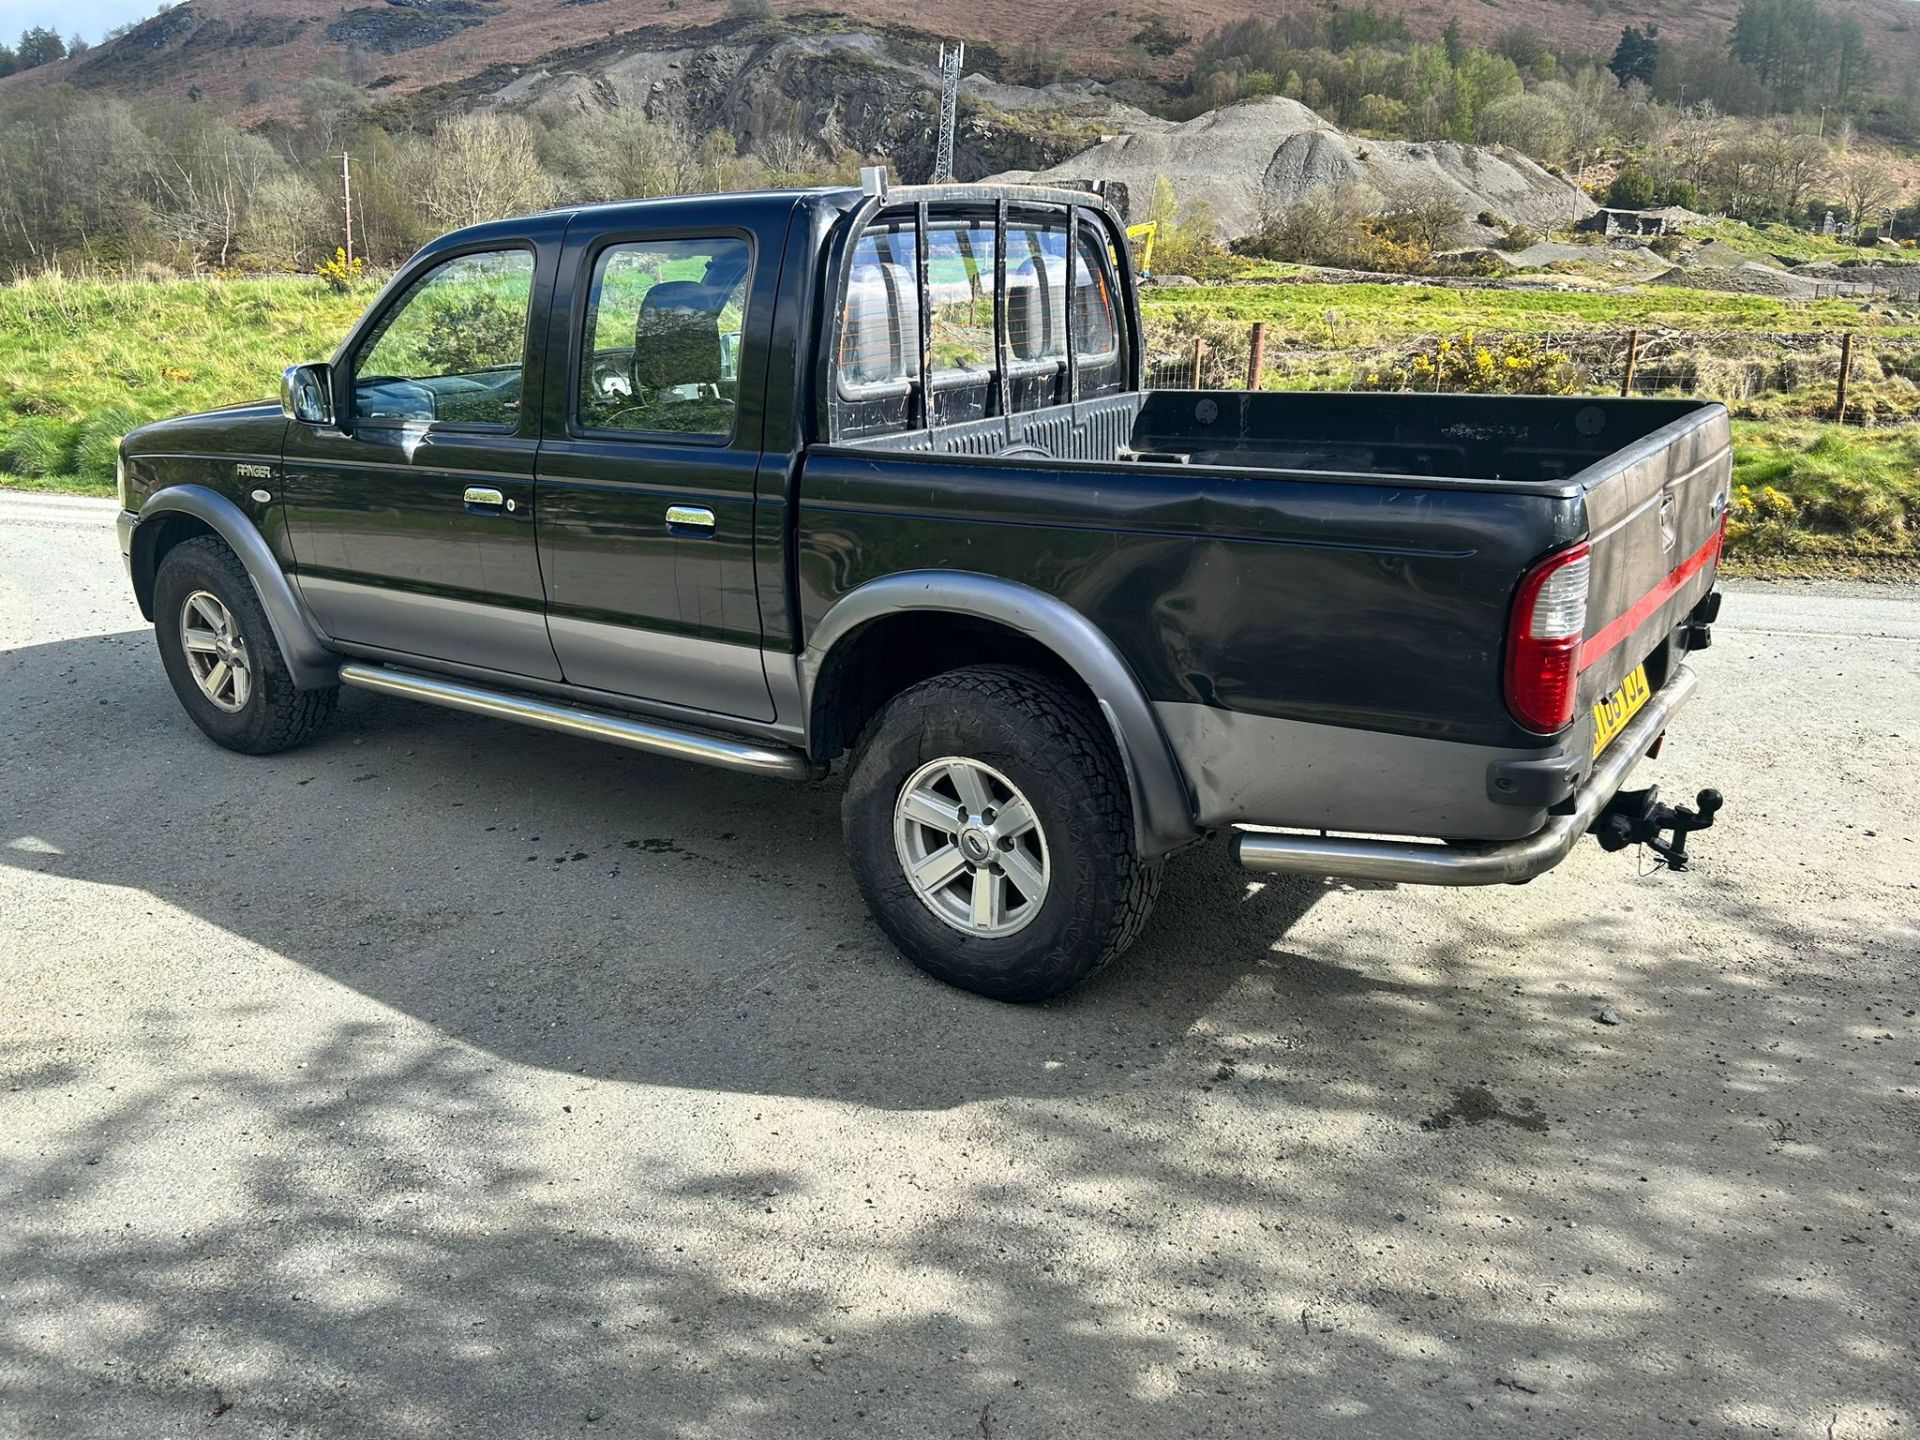 >>>SPECIAL CLEARANCE<<< FORD RANGER DOUBLE CAB PICKUP TRUCK